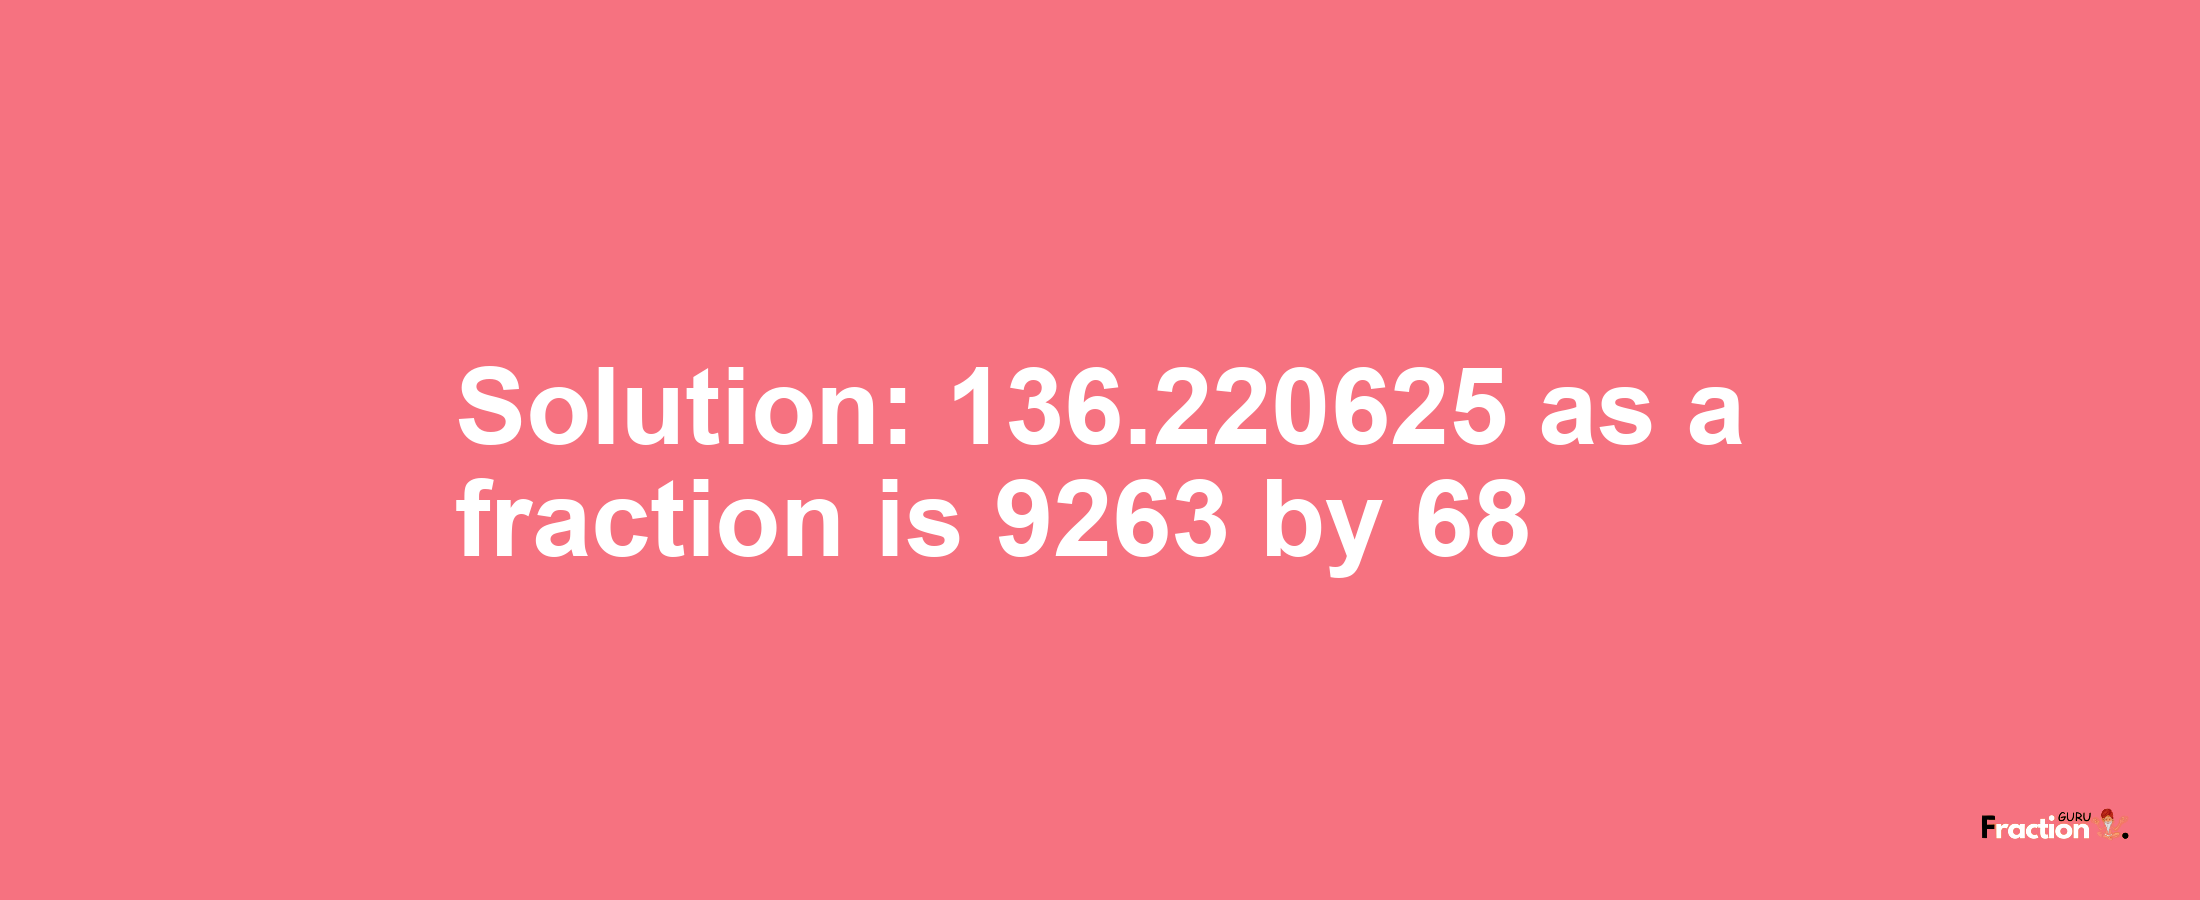 Solution:136.220625 as a fraction is 9263/68